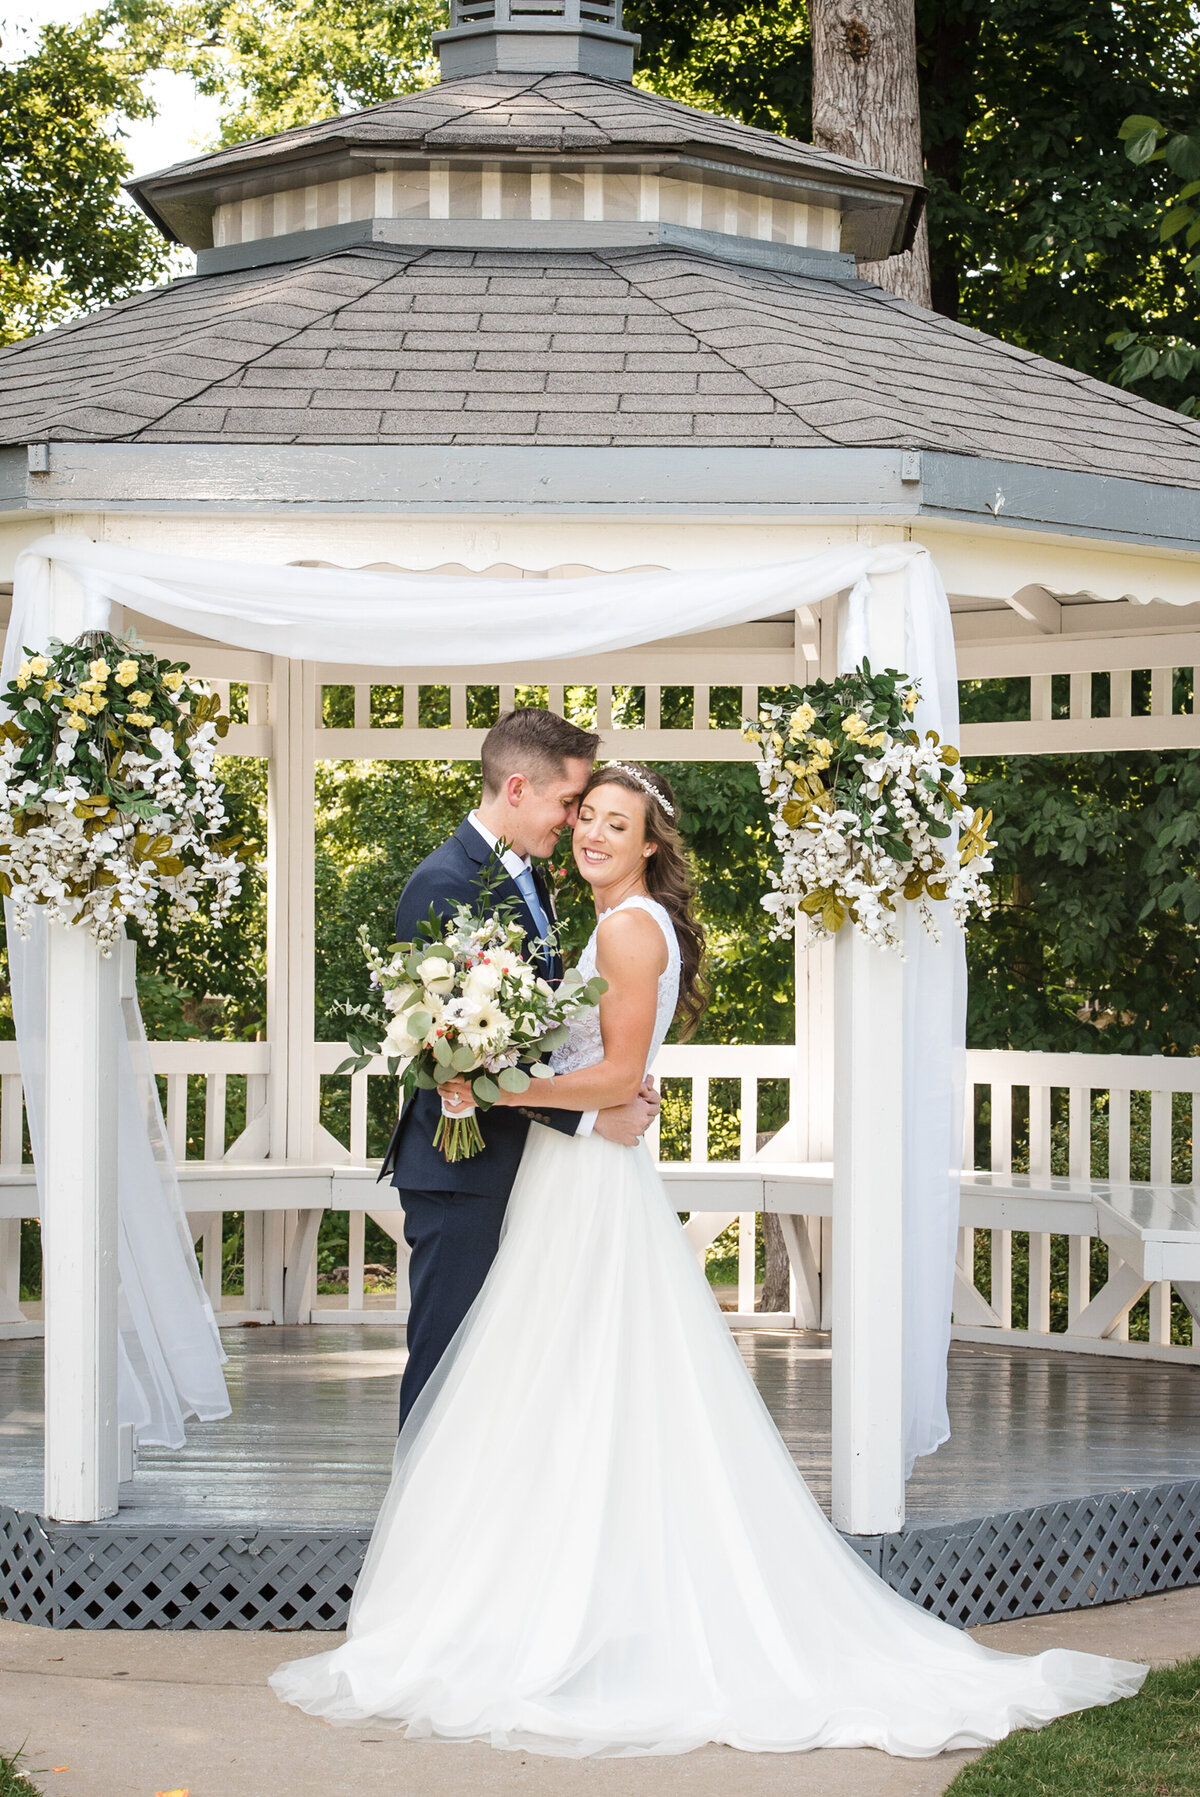 Groom-nuzzling-into-bride's-temple-both-smiling-with-eyes-closed-in-front-of-the-gazebo-at-NorthStone-Country-Club-in-North-Charlotte